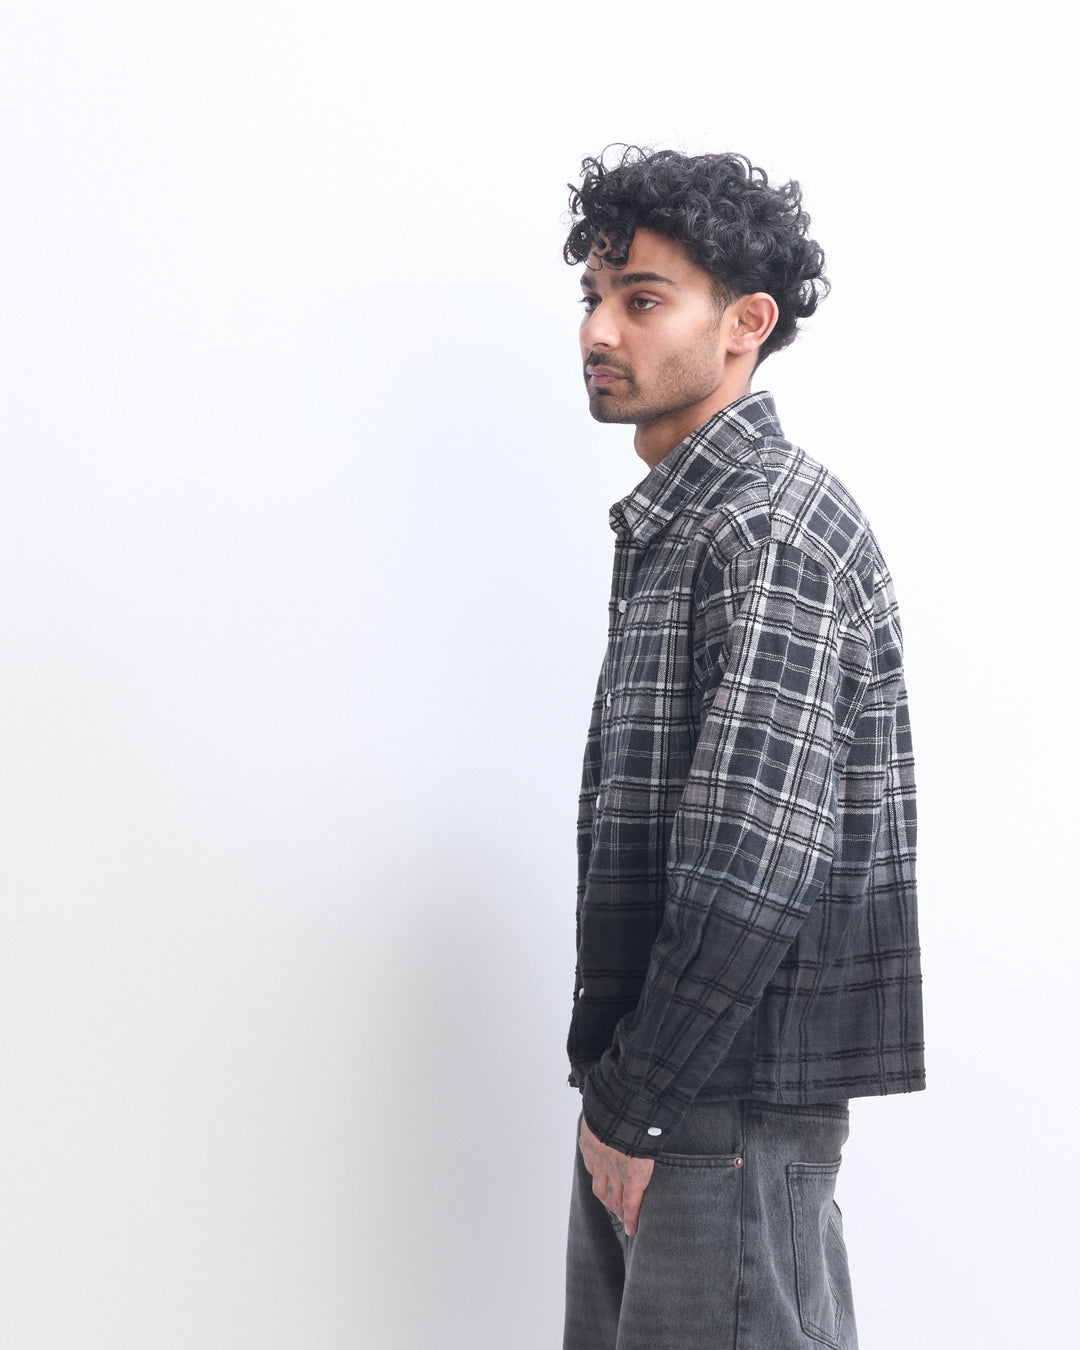 Faded Flannel